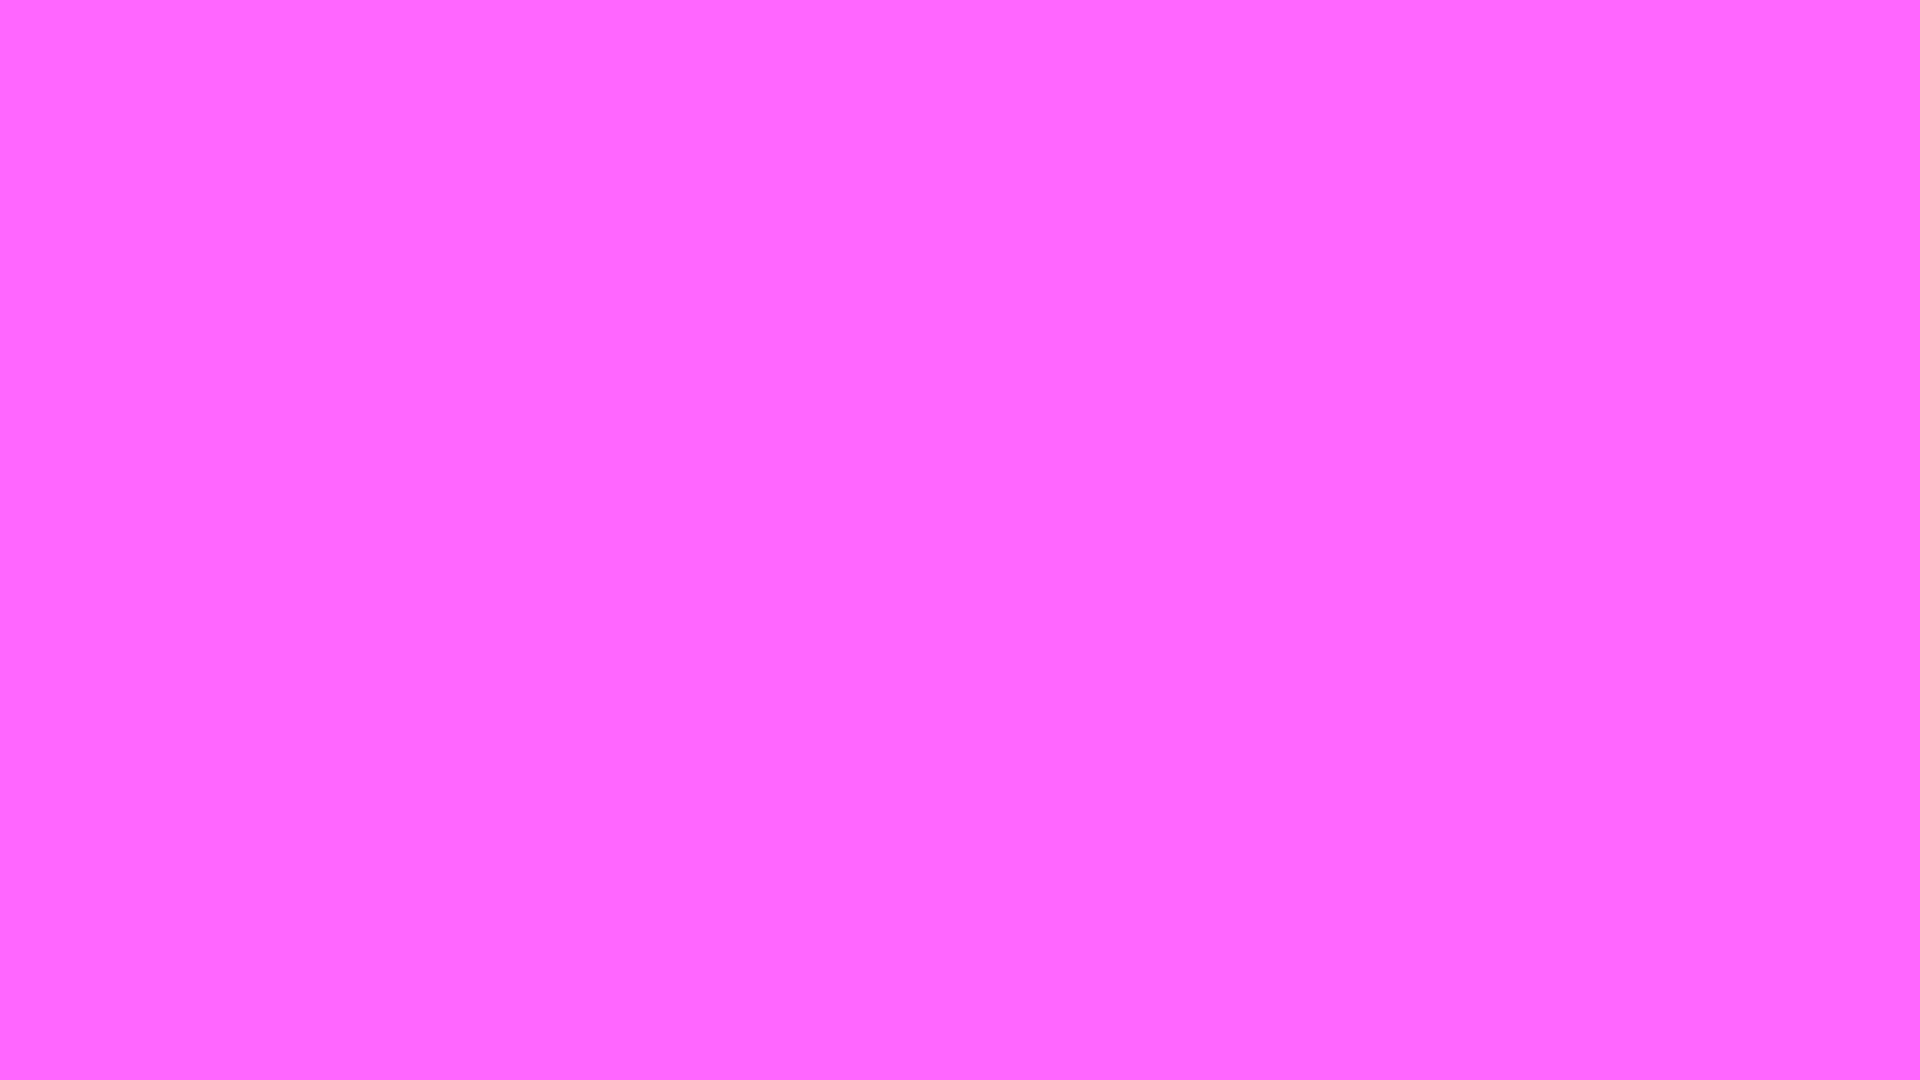 A vibrantly pink solid background